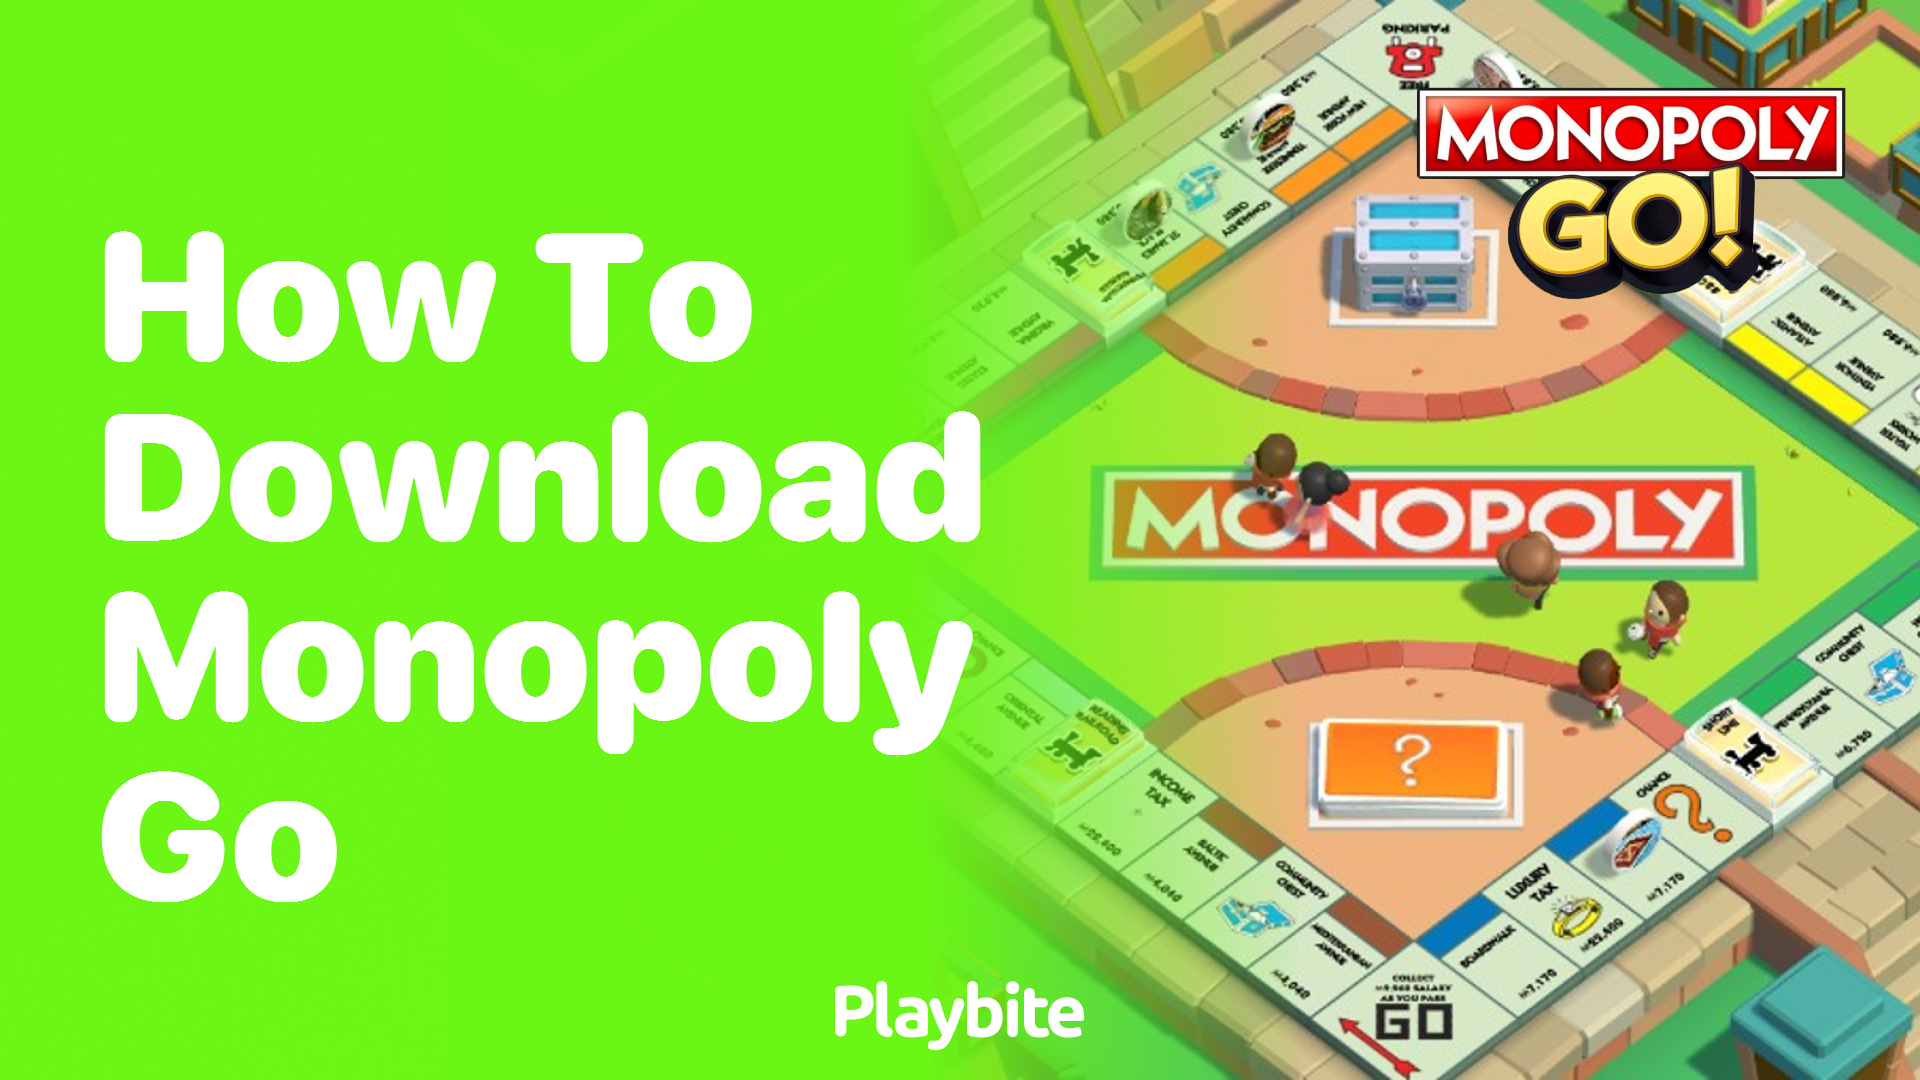 How to Download Monopoly Go: A Step-by-Step Guide